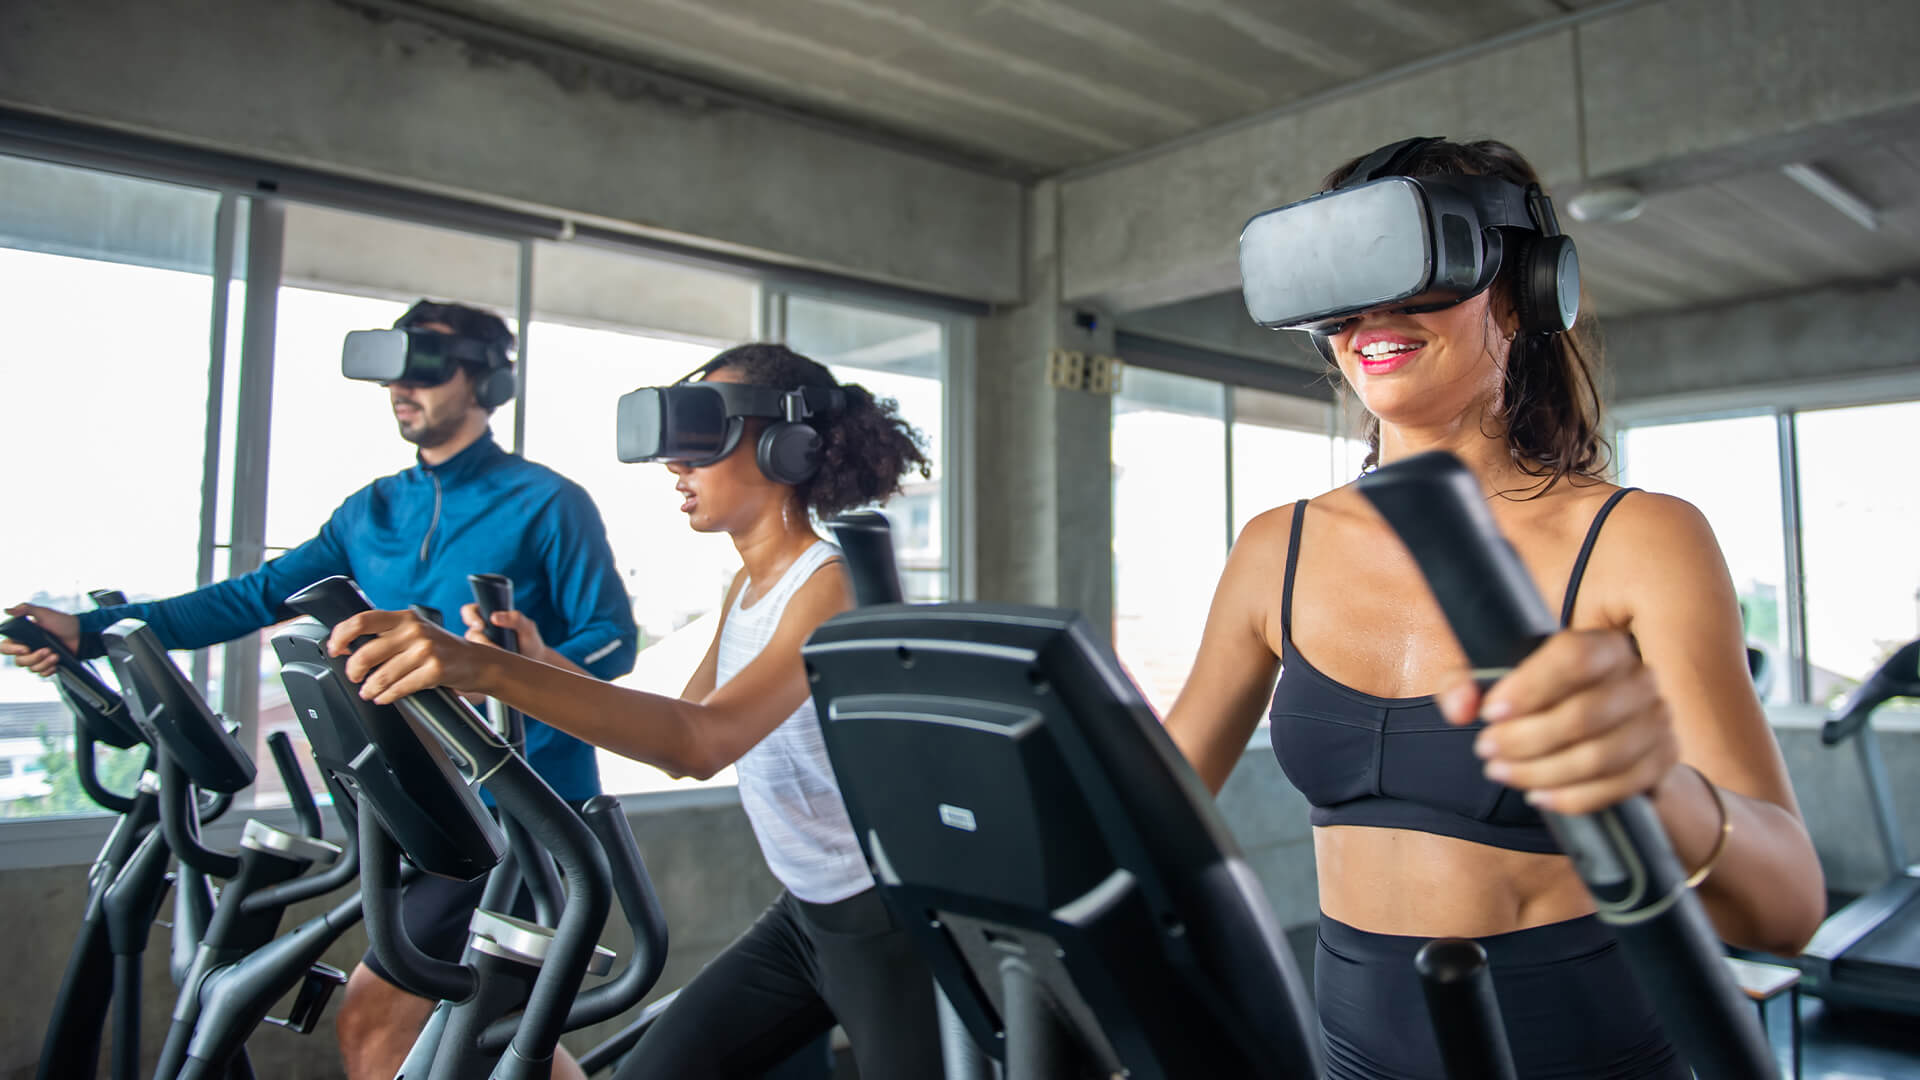 VR and Jazzercise: Five Fitness trends to Watch Out For in 2023